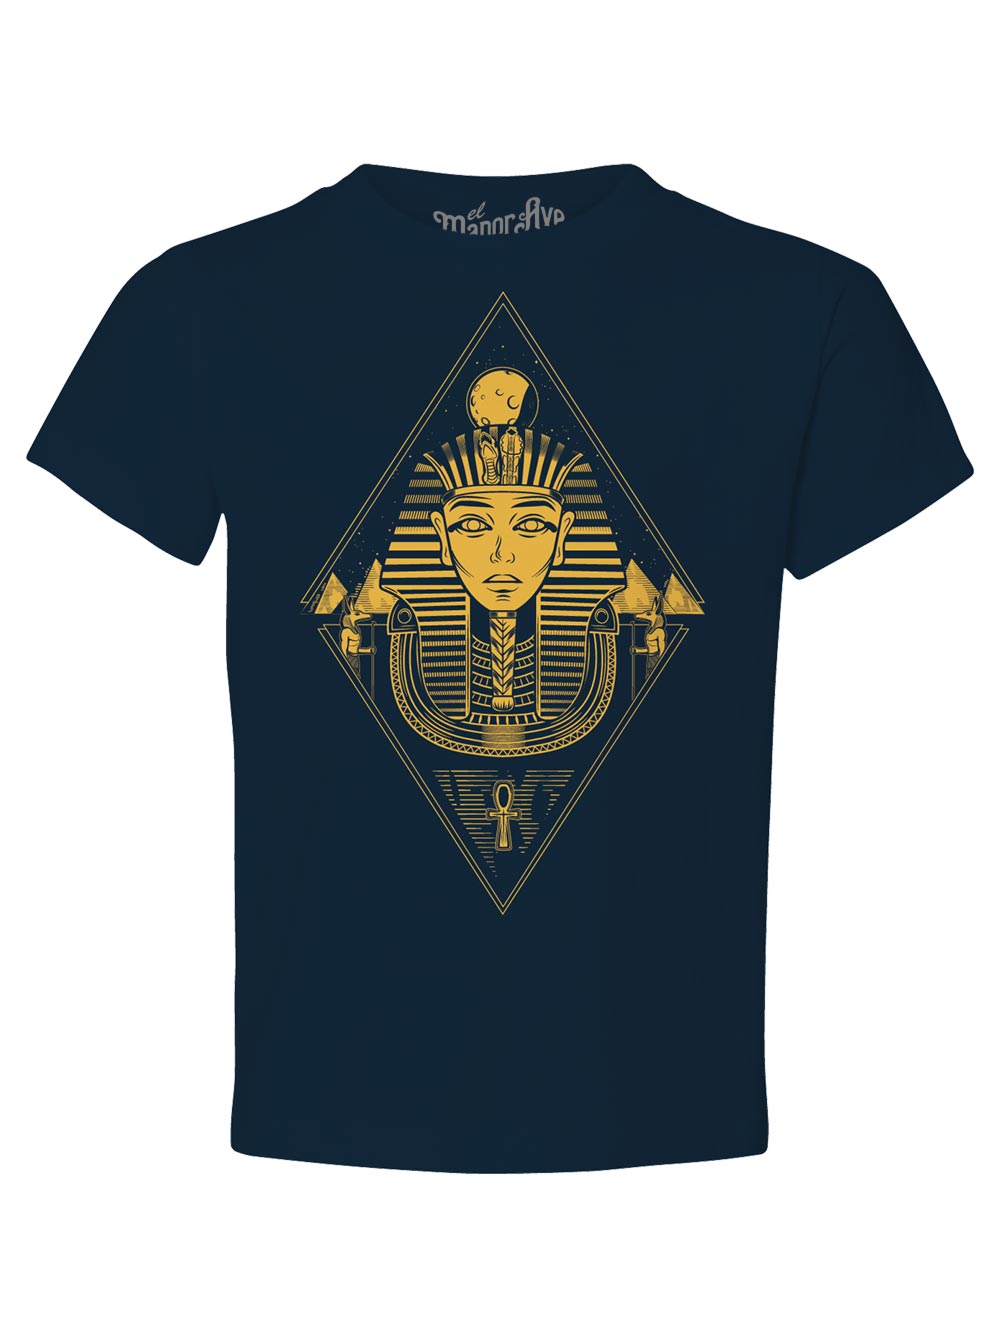 Pharaoh T-Shirt | Graphic Tees from El Manor Ave